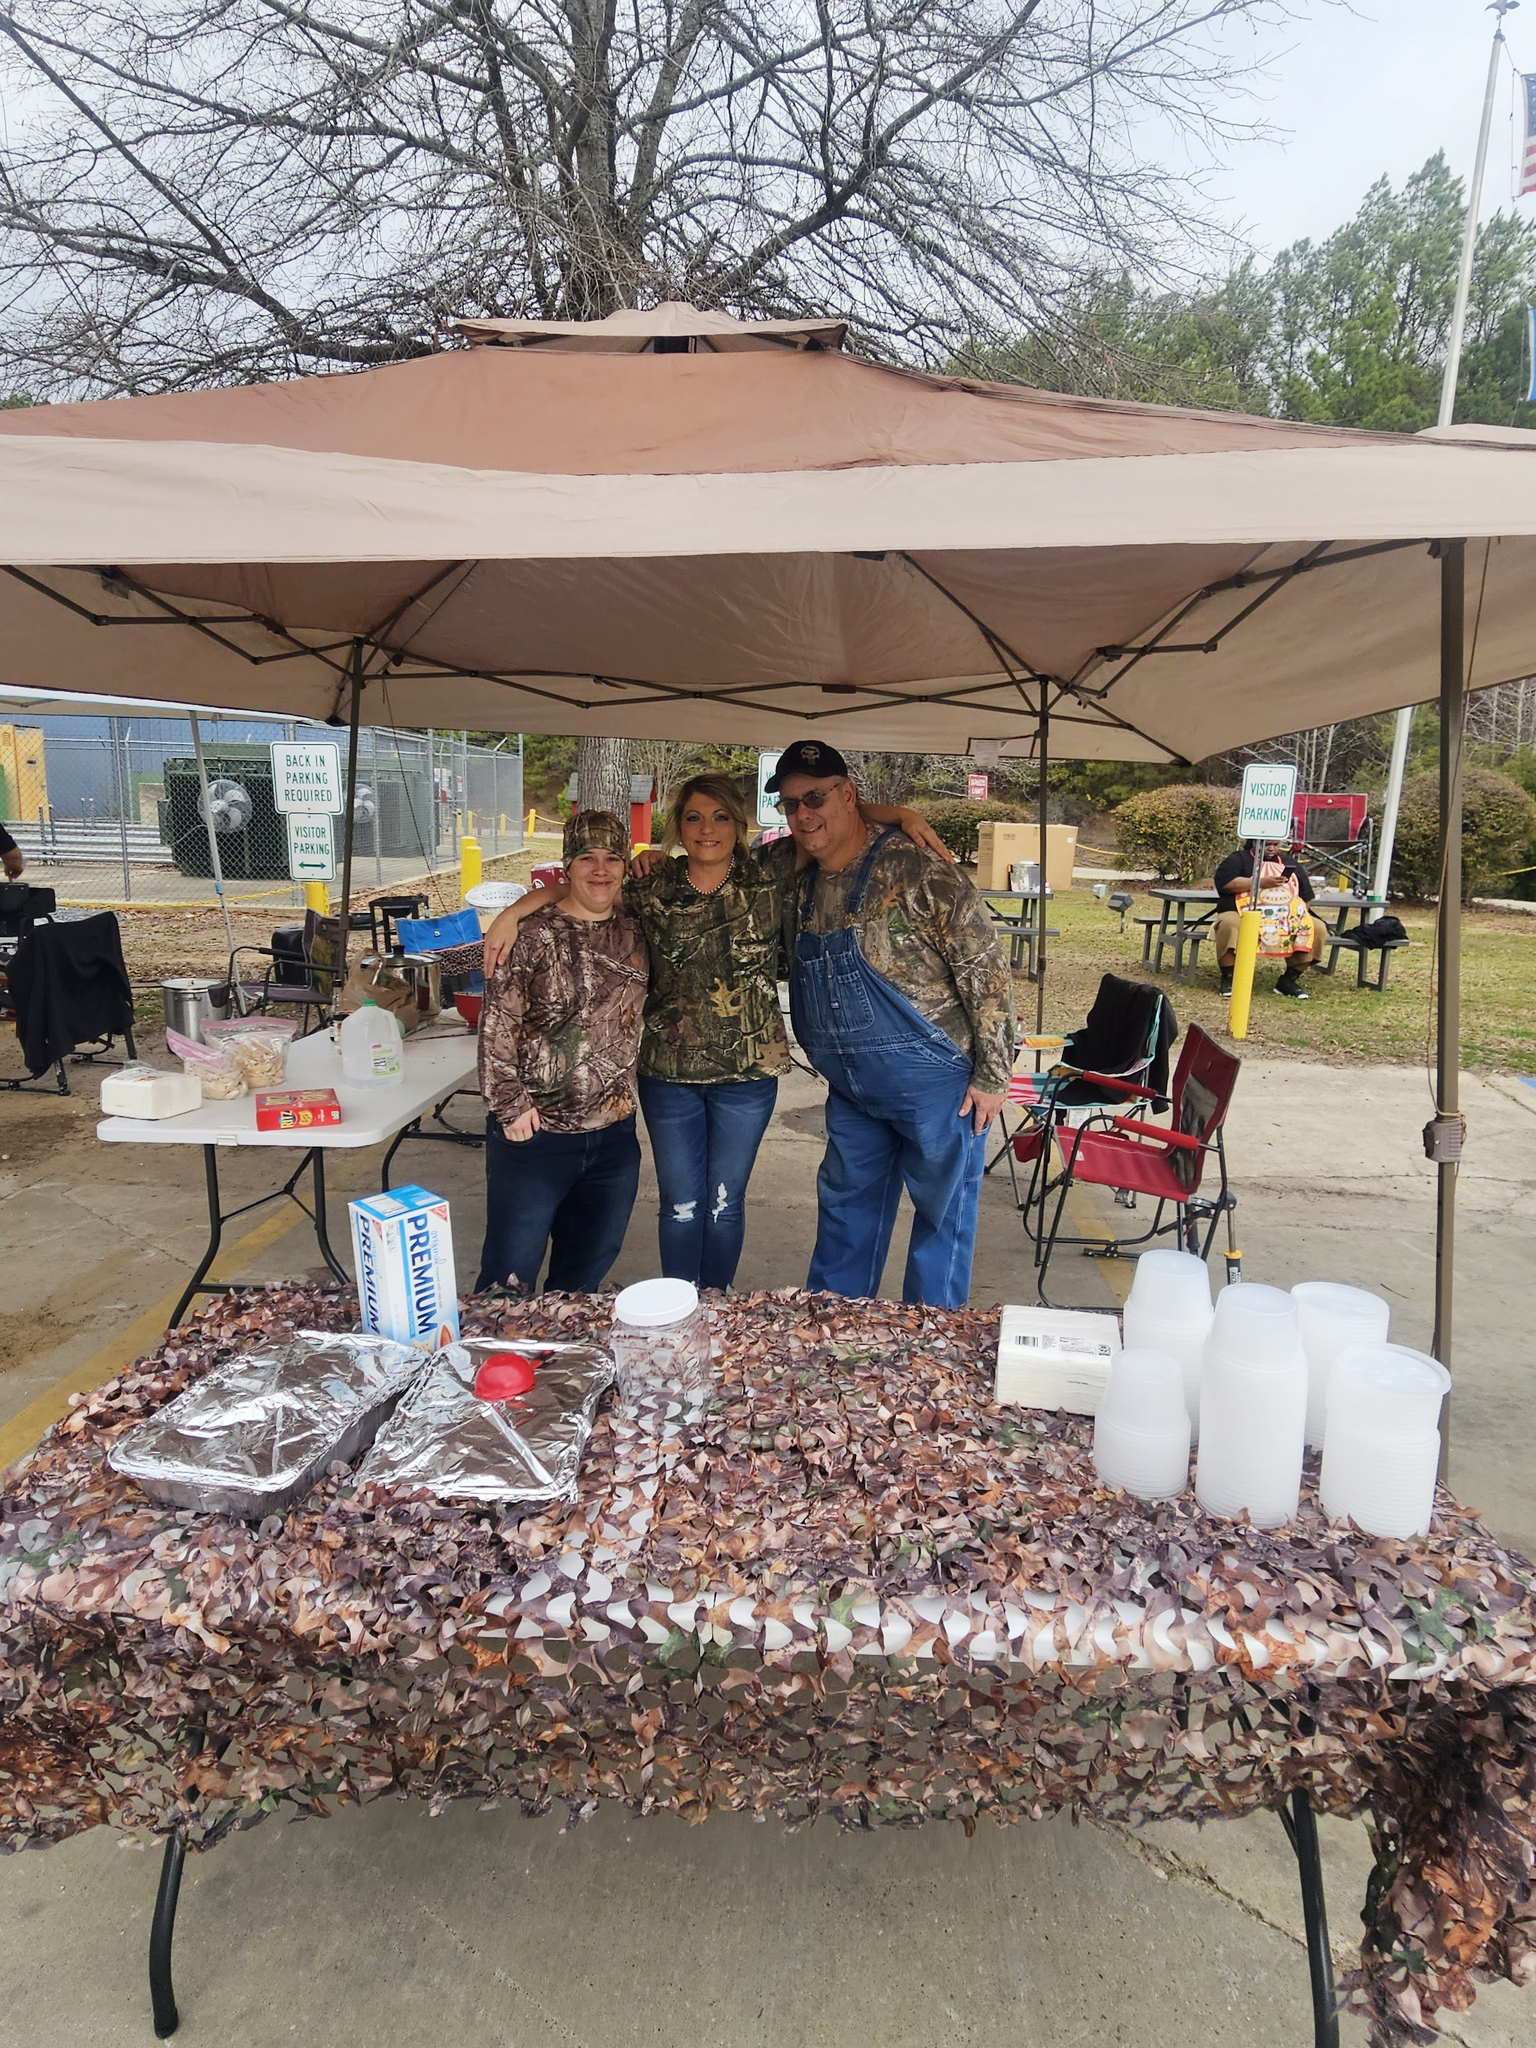 Image of Brandi Smith, Shonna Sullivan and Sam McCain. All three are dressed in camouflage shirts to match their 'Hunting for a Cure' theme. The table in front of them is also covered in camouflage material with food containers on top.